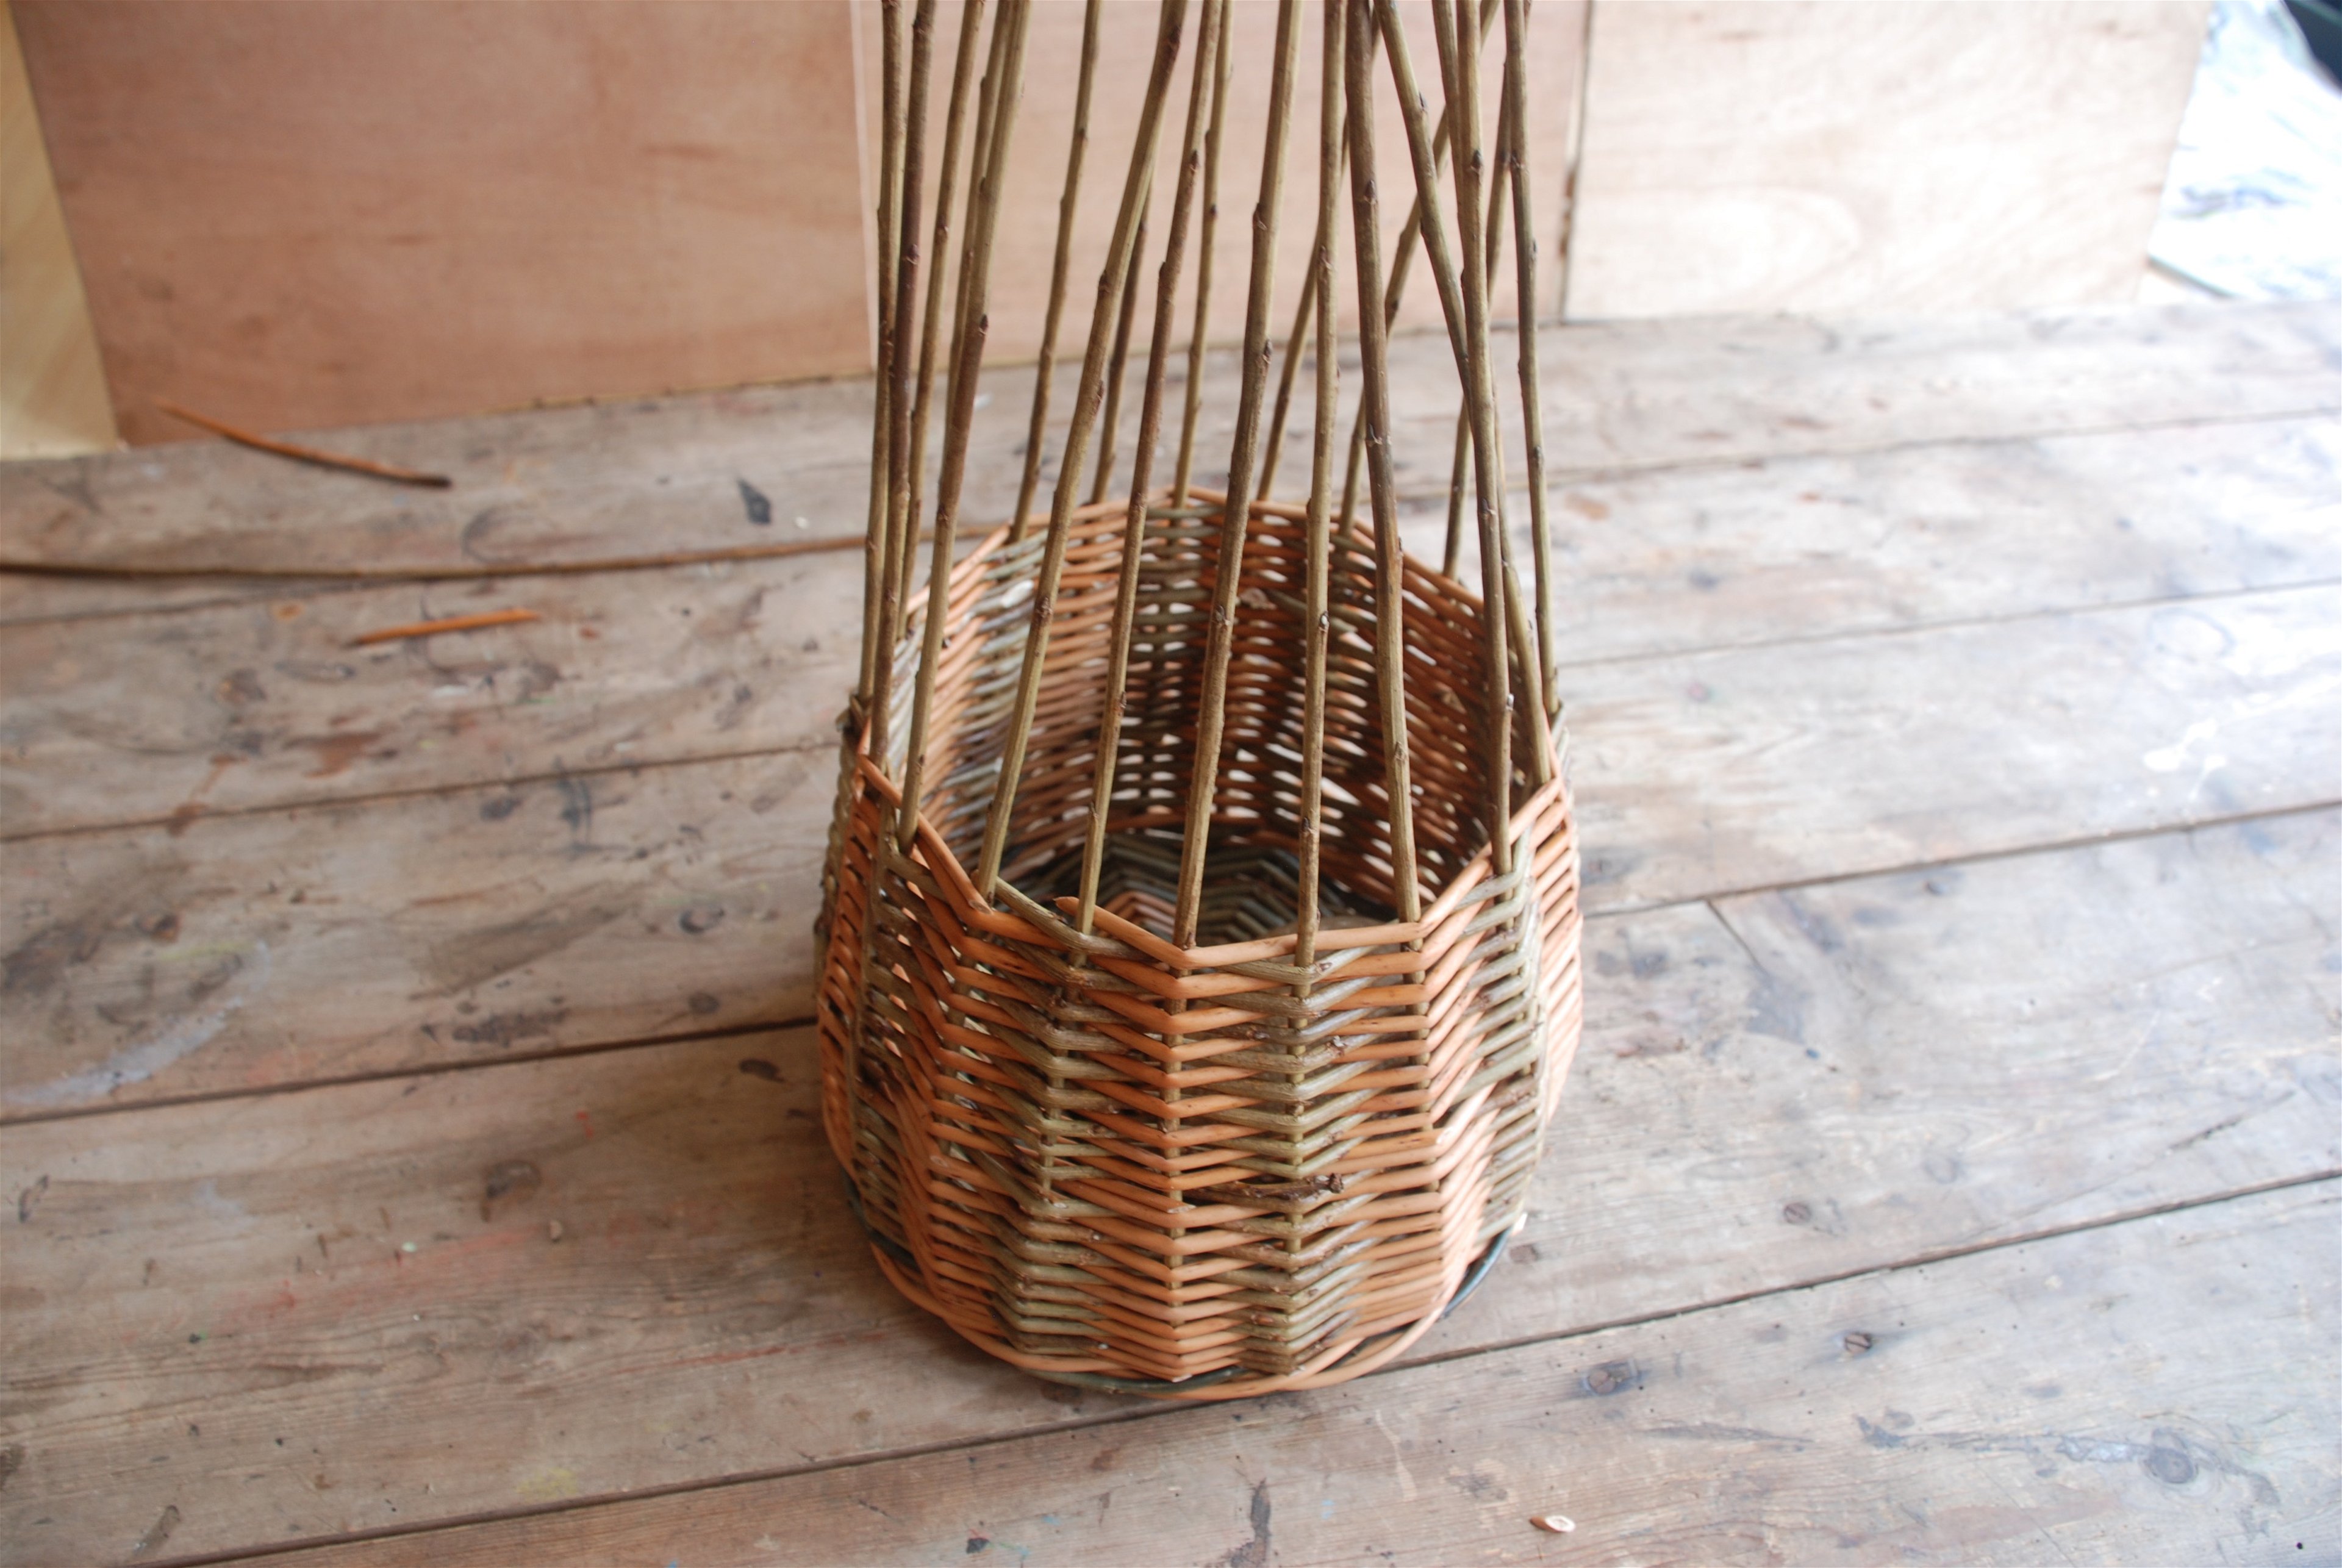 English Willow Basket Making for beginners. 